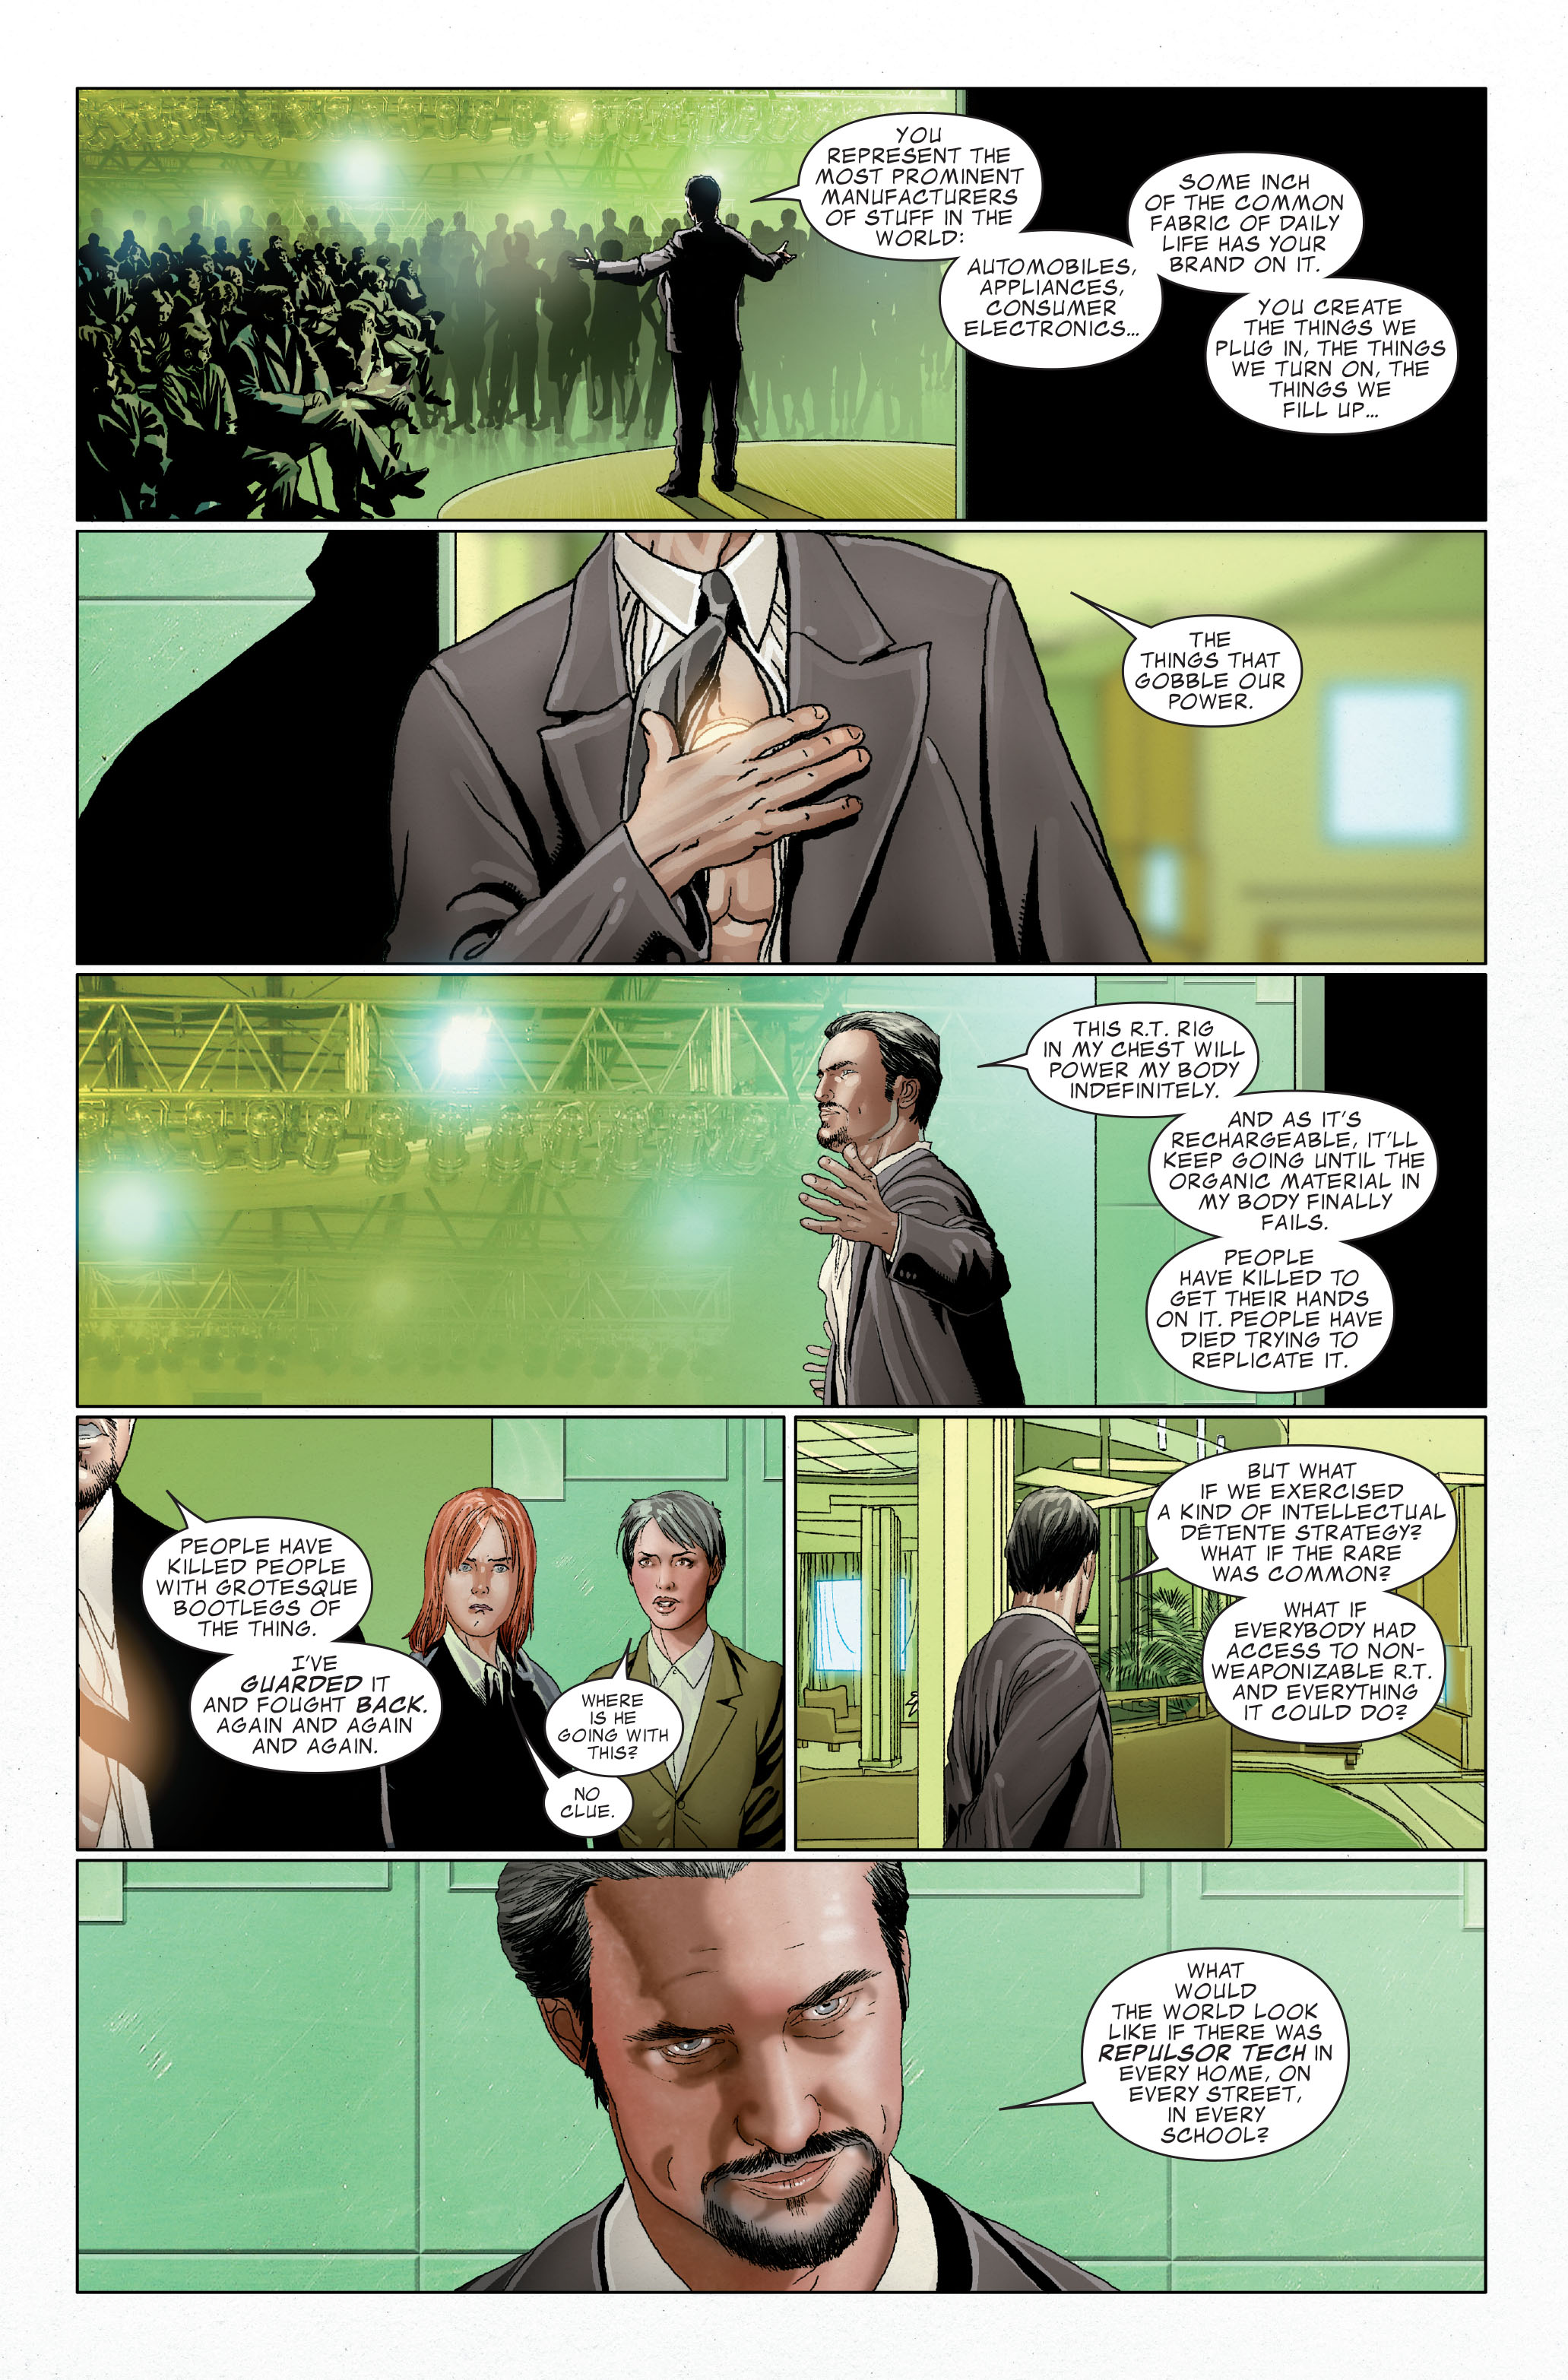 Invincible Iron Man (2008) 25 Page 34